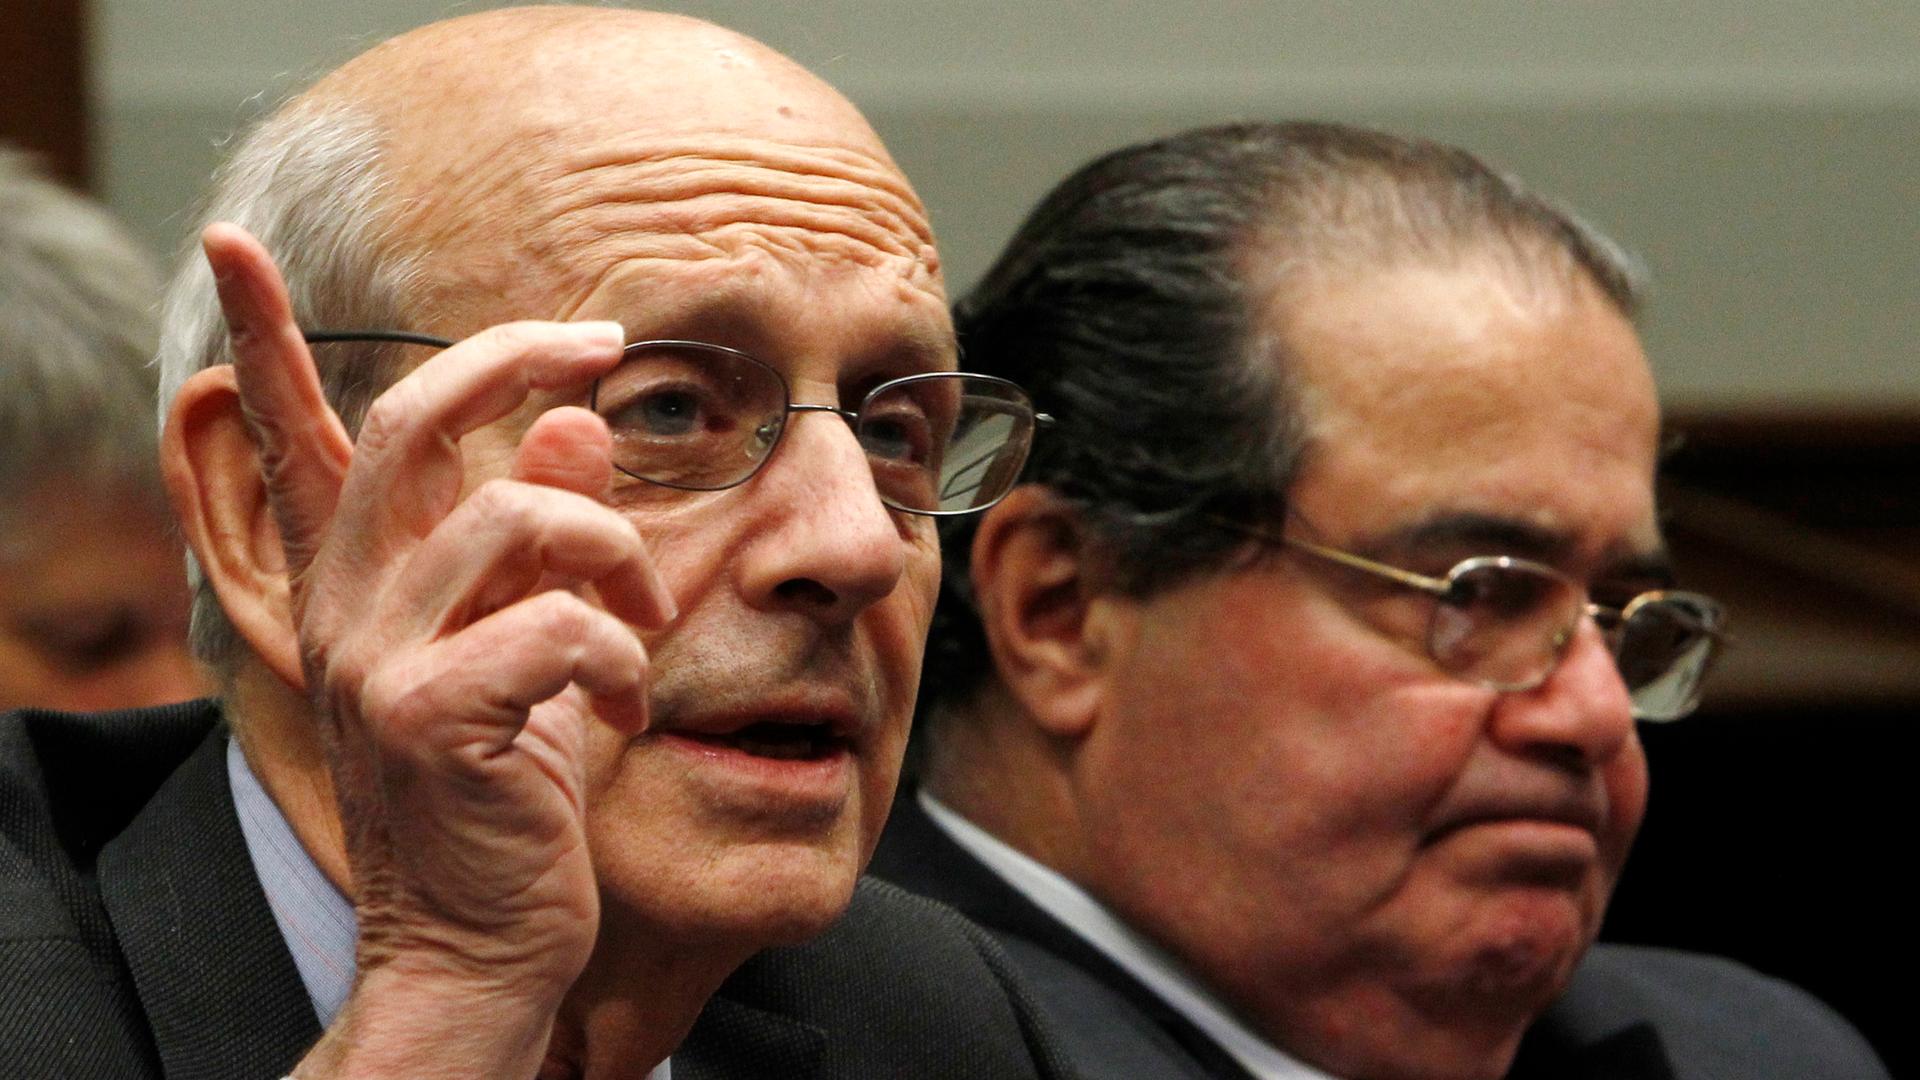 Supreme Court Justices Stephen Breyer and Antonin Scalia testify before a House Judiciary Commercial and Administrative Law Subcommittee hearing in 2010.